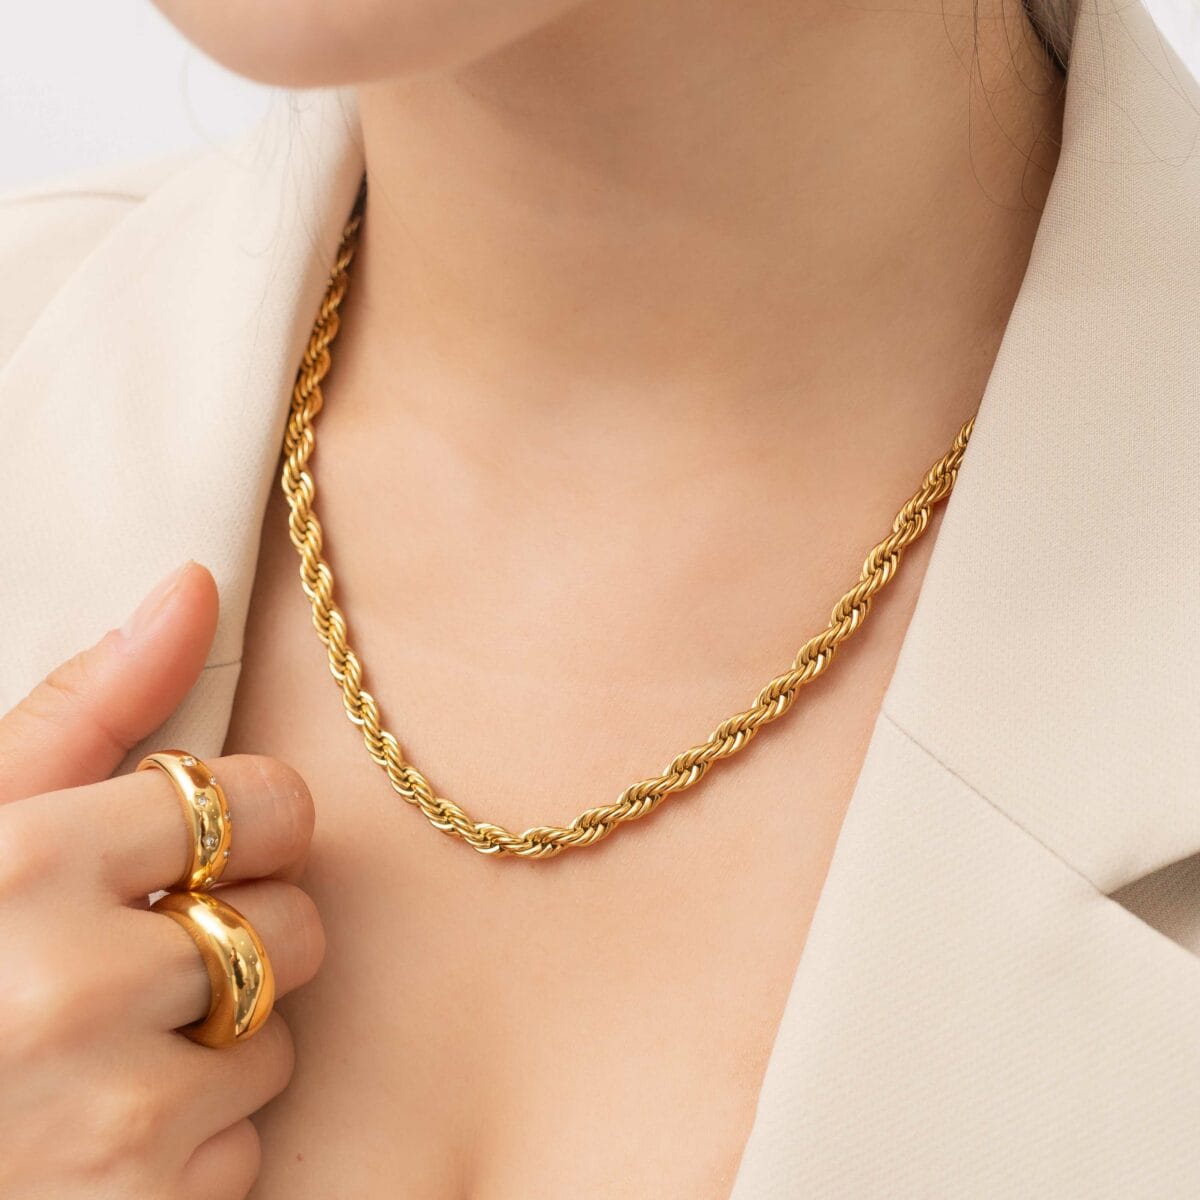 https://m.clubbella.co/product/bold-gold-rope-chain-necklace/ Resized (62 of 134)